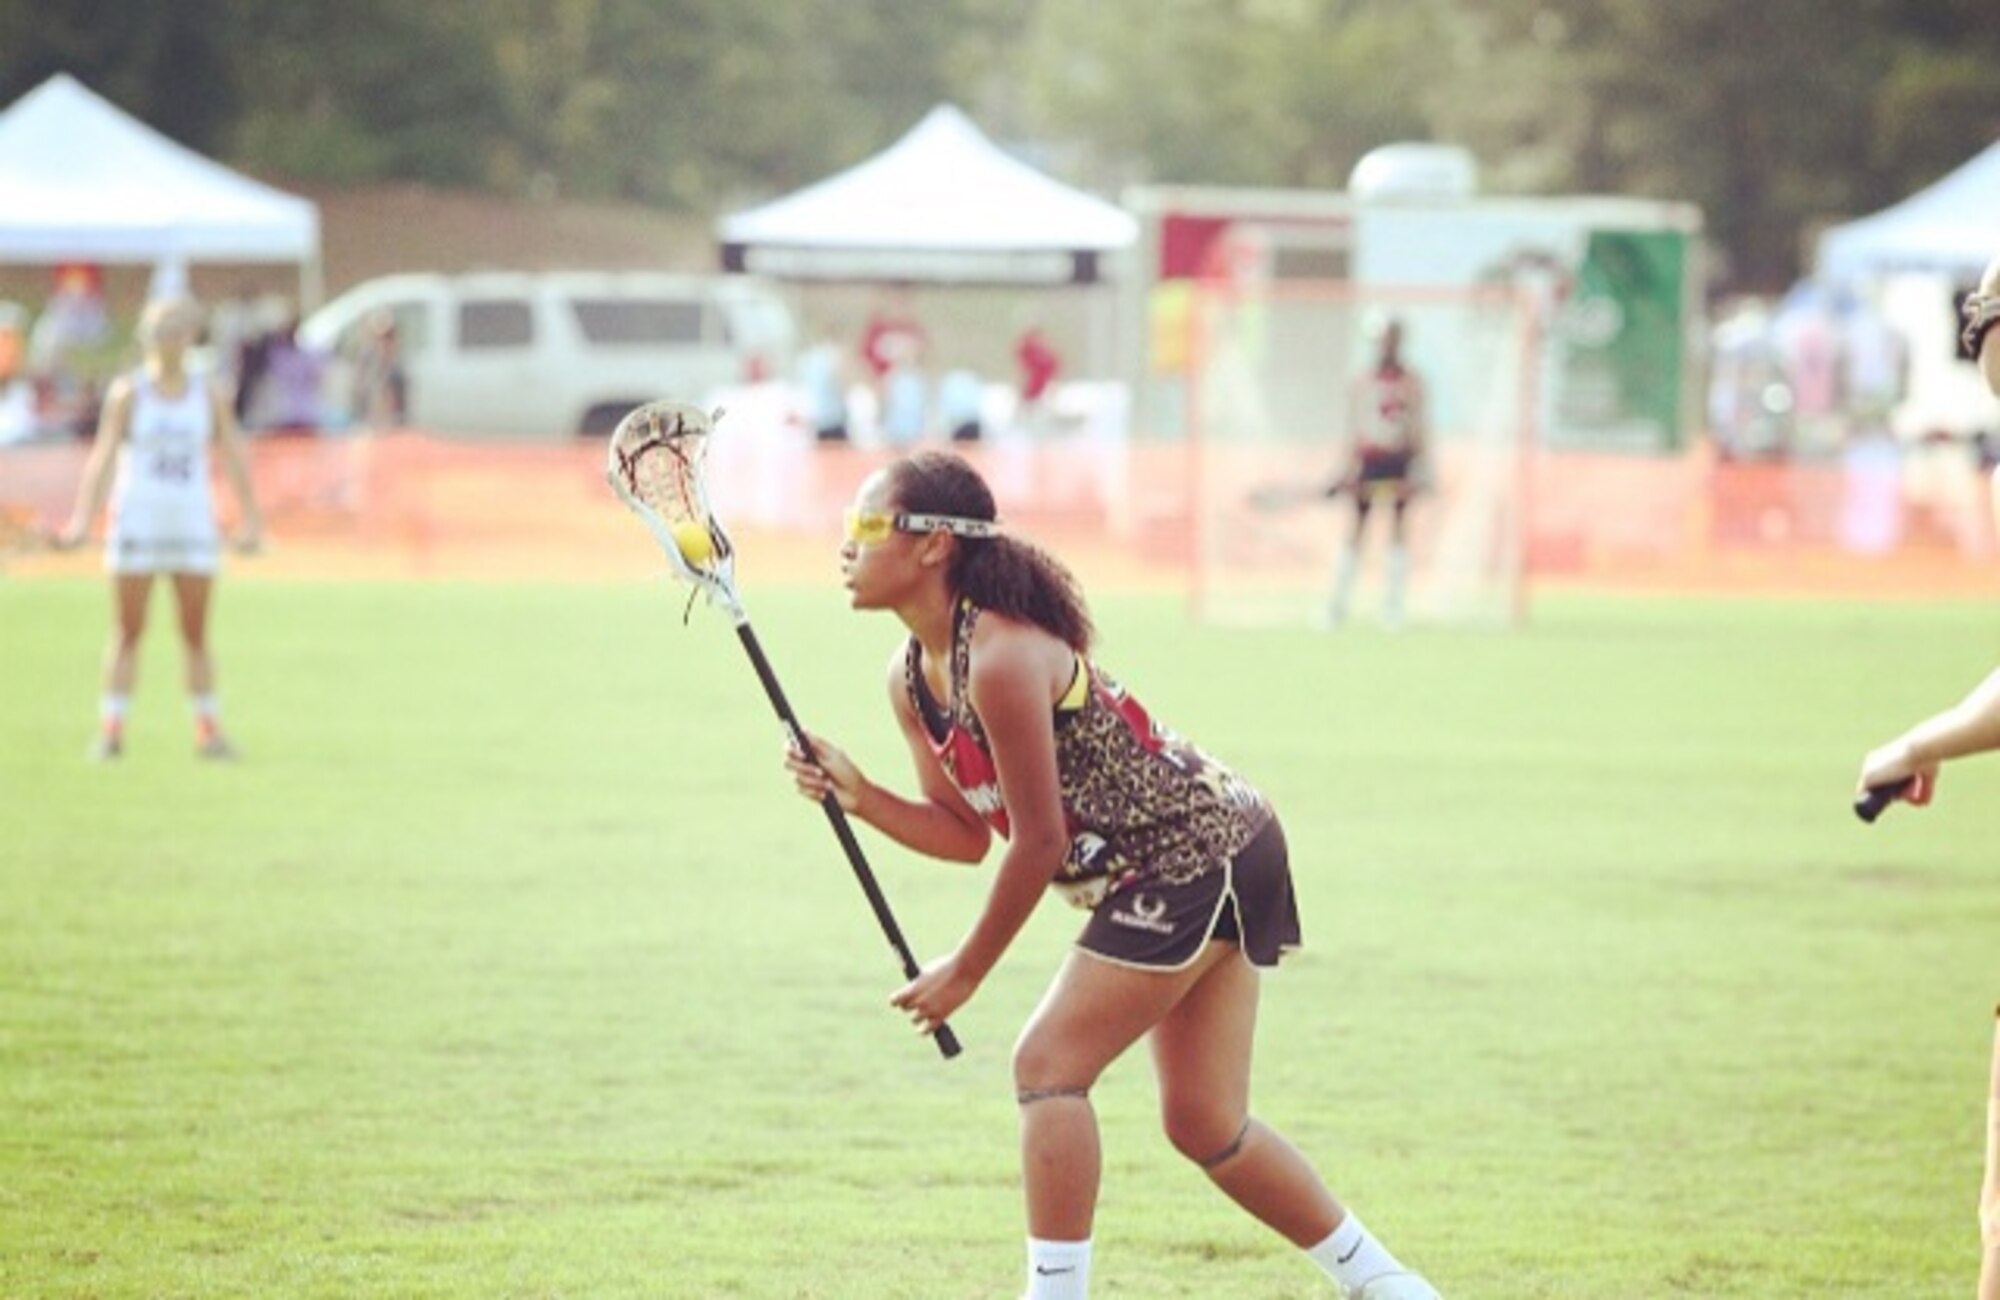 Amya Hudson, daughter of Maj. Quincy Hudson, scans the field during a lacrosse game in Georgia, Oct. 10, 2014. Amya signed on to play lacrosse for the Navy Academy. (U.S. Air Force courtesy photo/Released)